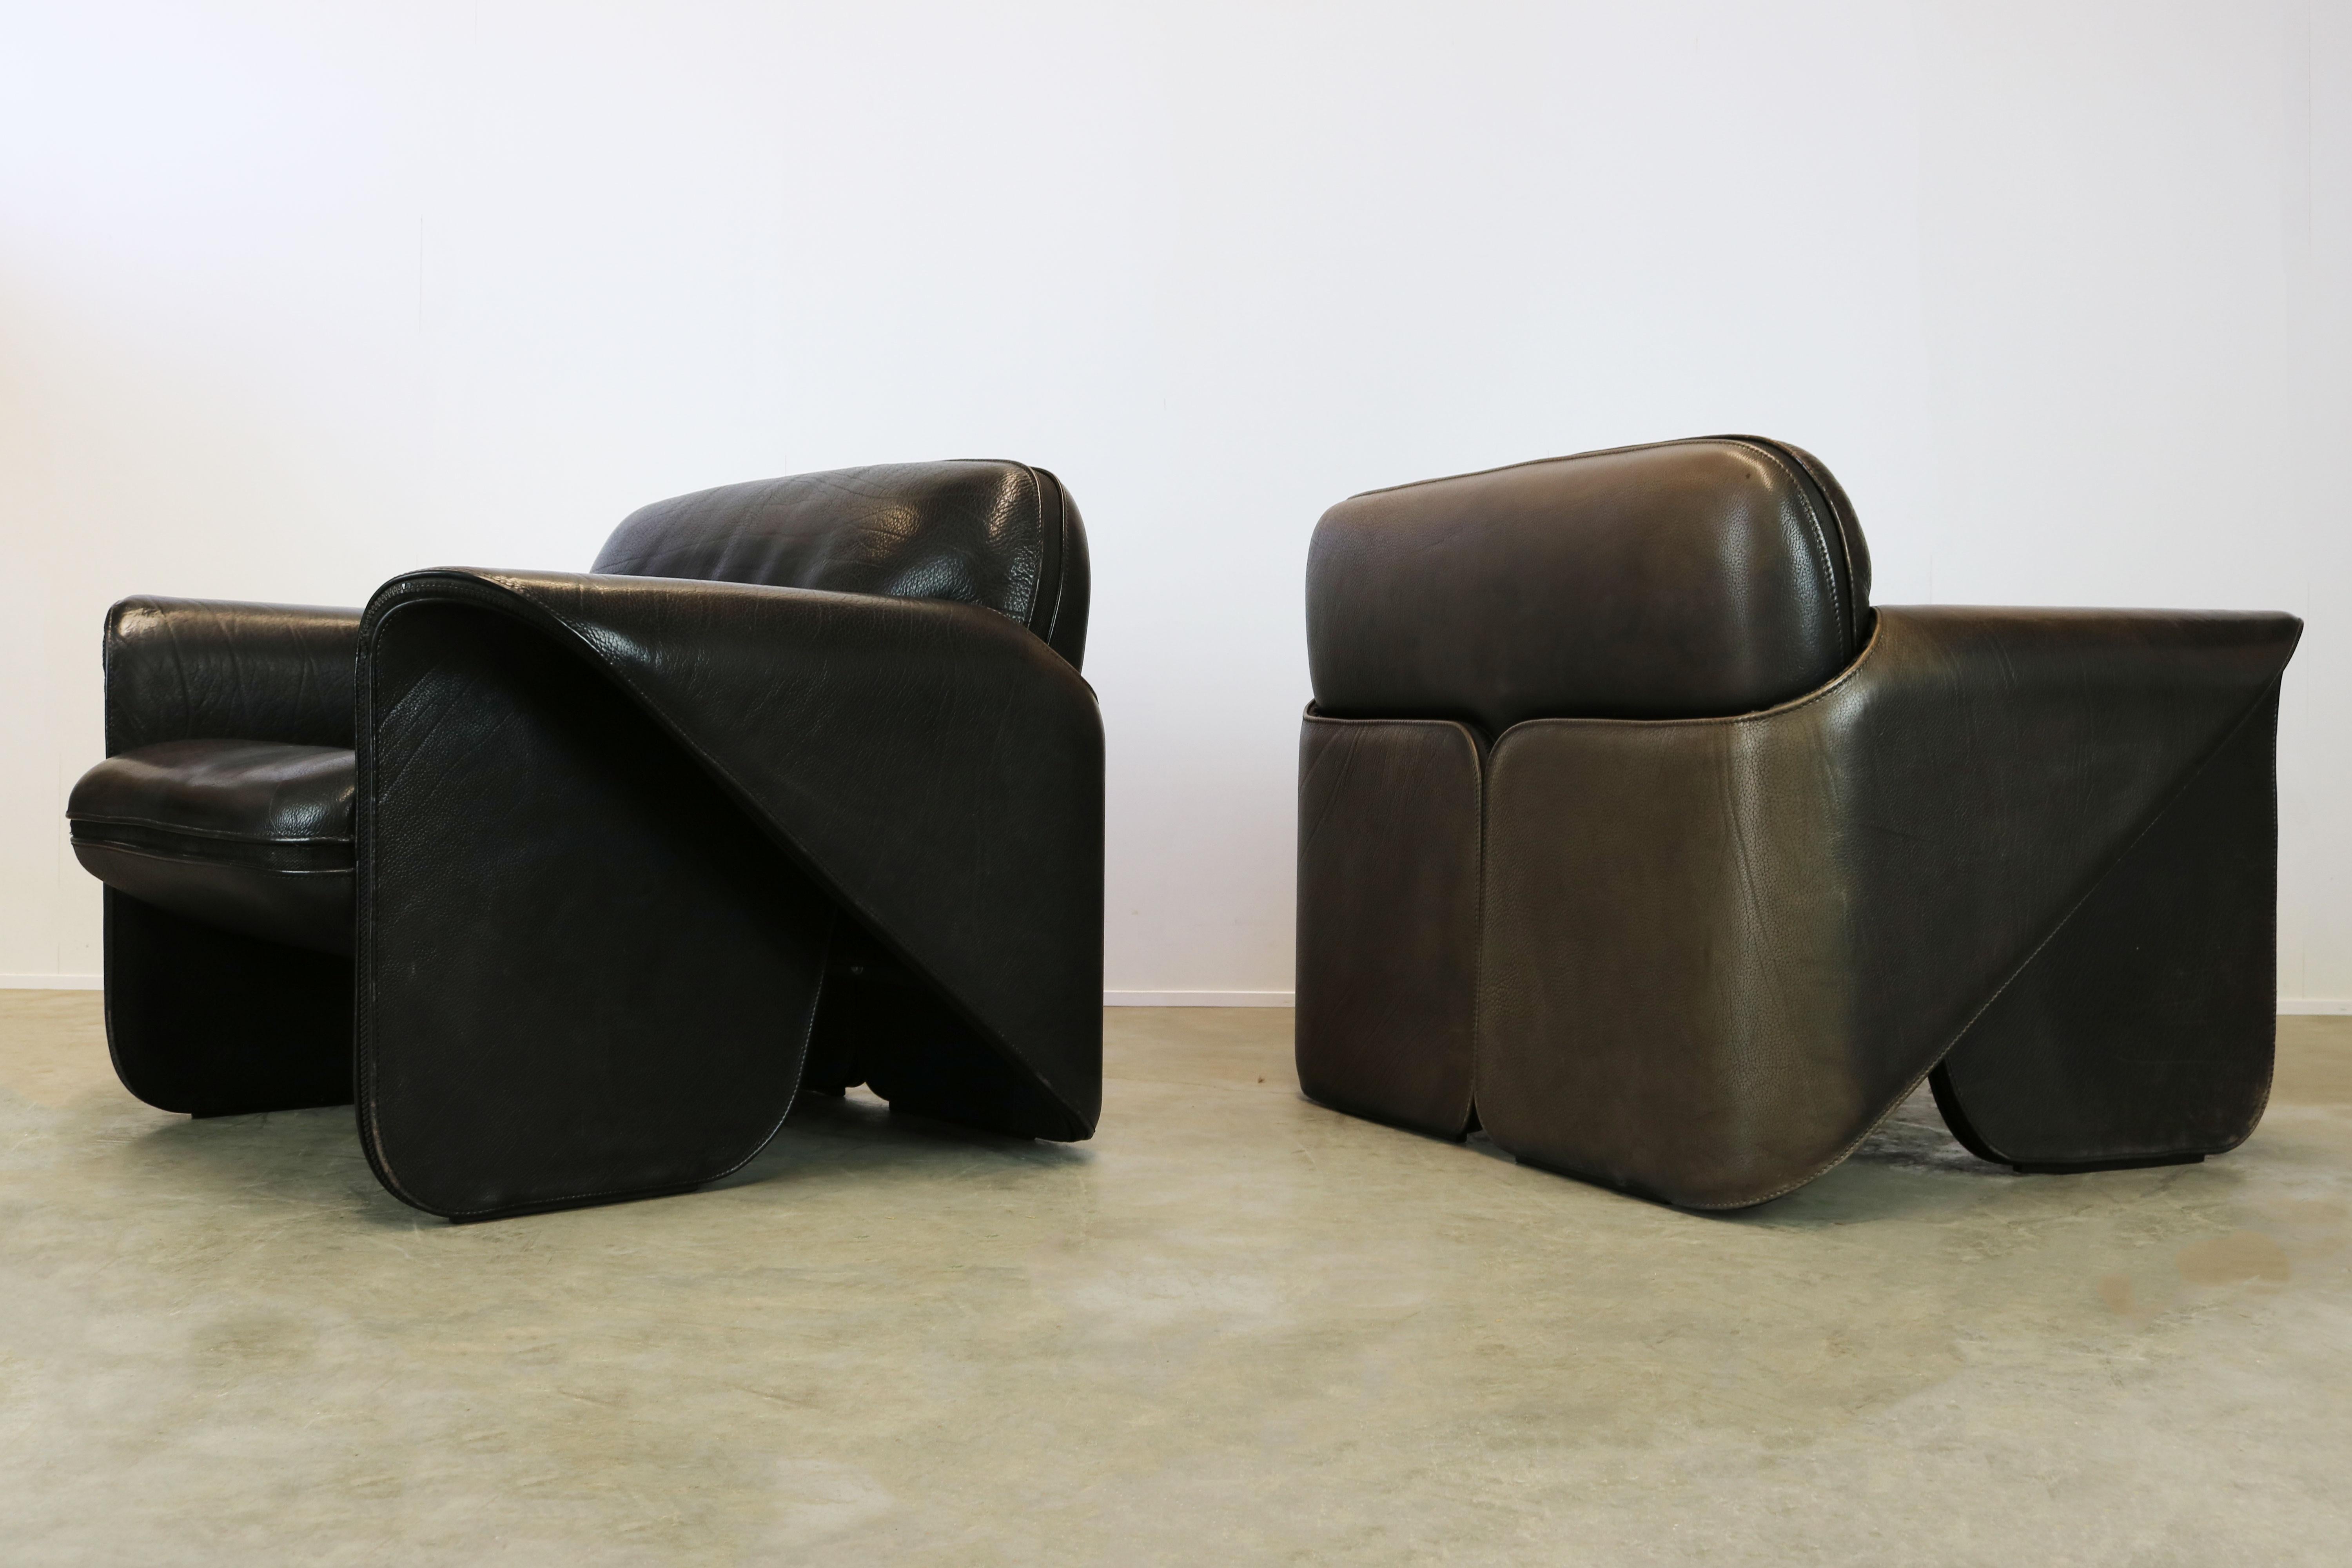 Rare Pair of Swiss De Sede Ds 125 Lounge Chairs by Gerd Lange 1978 Black Leather 8